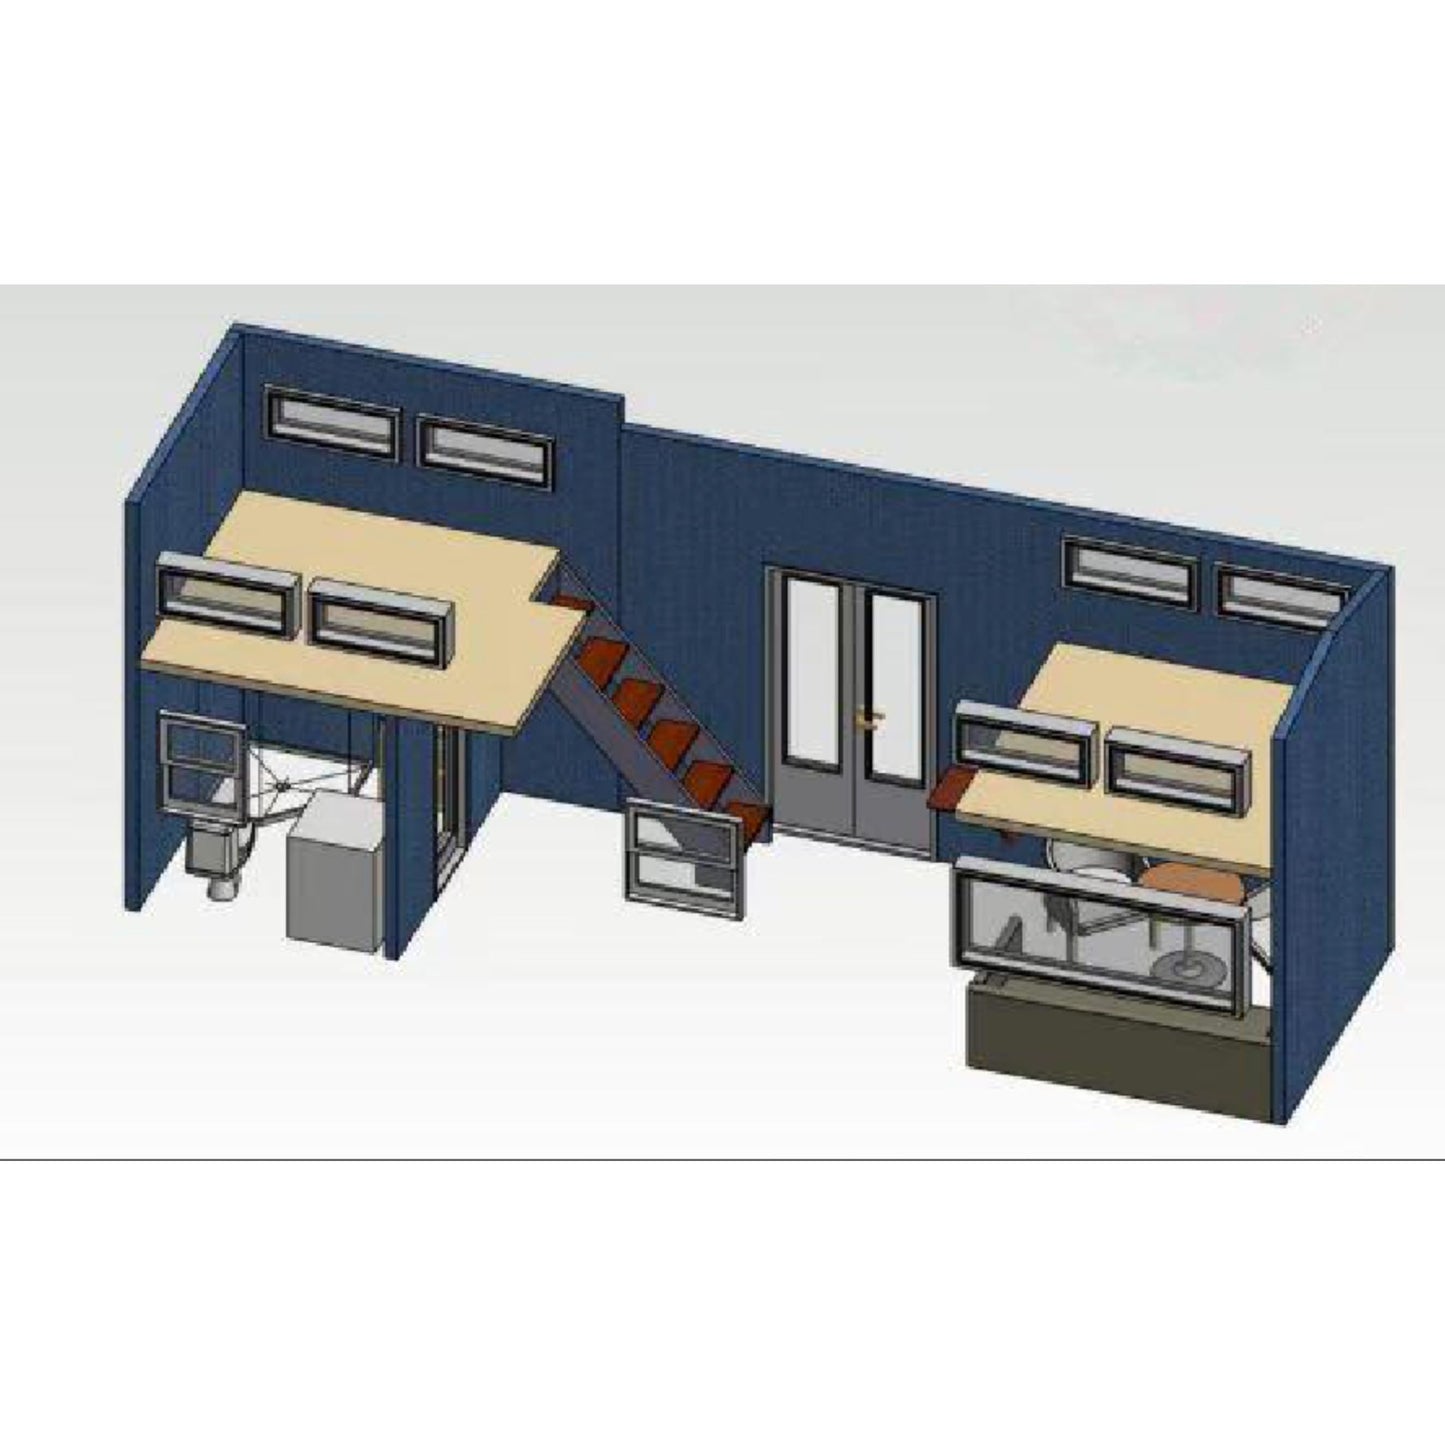 Mountain Style Modular Container Camper Portable Trailer Mobile Tiny Home House on Wheels Mobile House,Size 7.8 * 2.3 * 4.2 M,Fully Furnished Kitchen and Bathroom! (DP HustleX)